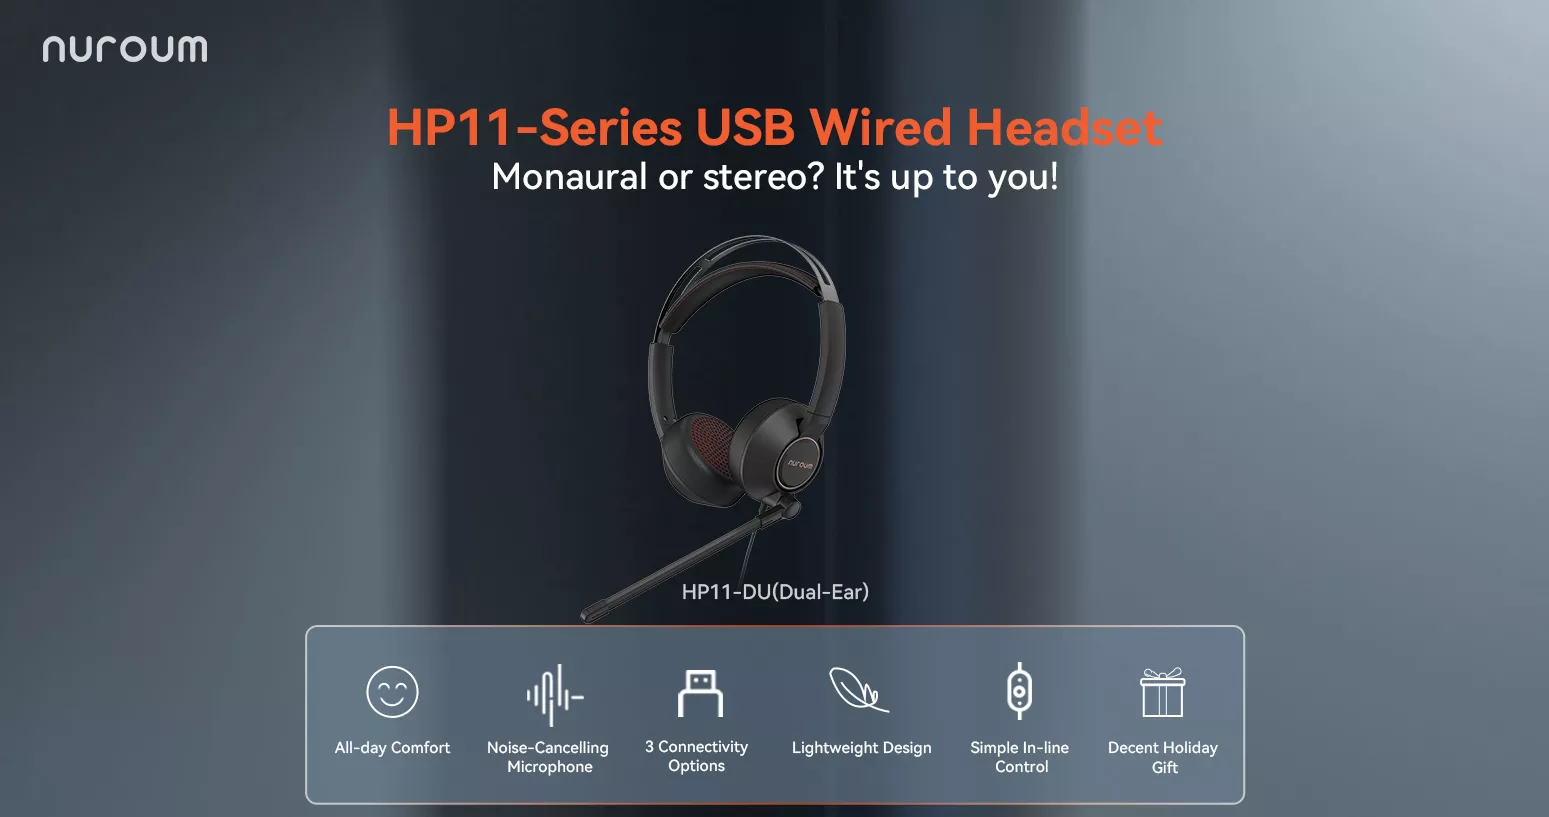 HP11-Series USB Wired Headset